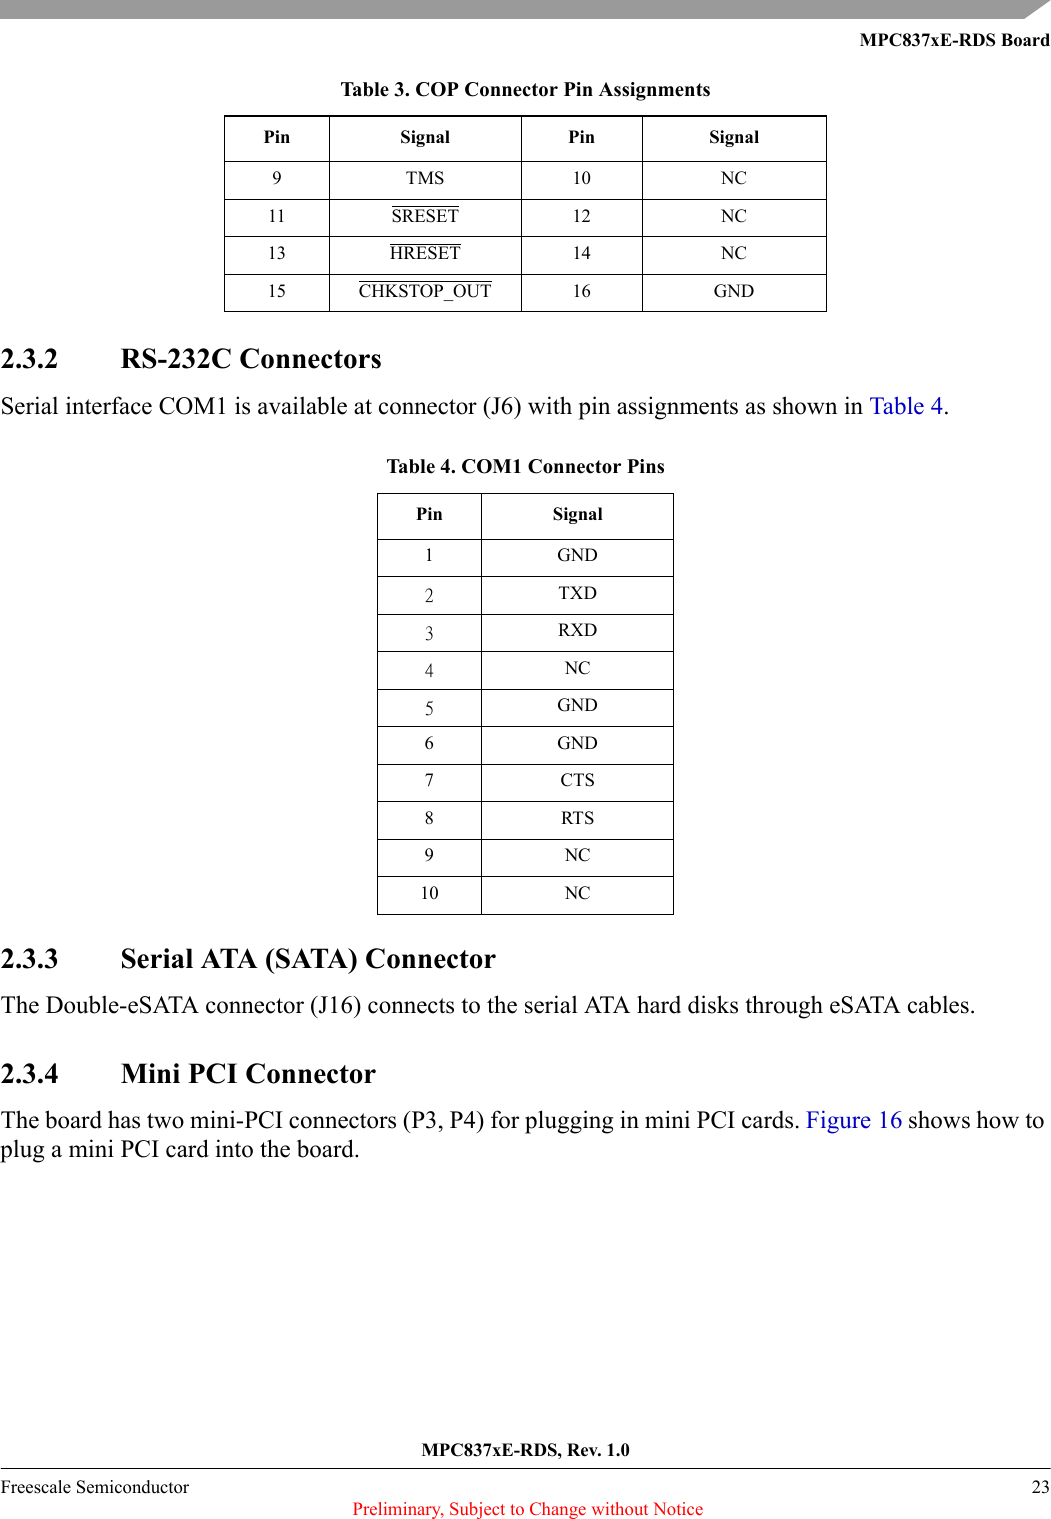 MPC837xE-RDS BoardMPC837xE-RDS, Rev. 1.0Freescale Semiconductor 23 Preliminary, Subject to Change without Notice2.3.2 RS-232C ConnectorsSerial interface COM1 is available at connector (J6) with pin assignments as shown in Table 4.2.3.3 Serial ATA (SATA) ConnectorThe Double-eSATA connector (J16) connects to the serial ATA hard disks through eSATA cables.2.3.4 Mini PCI ConnectorThe board has two mini-PCI connectors (P3, P4) for plugging in mini PCI cards. Figure 16 shows how to plug a mini PCI card into the board.9TMS 10 NC11 SRESET 12 NC13 HRESET 14 NC15 CHKSTOP_OUT 16 GNDTable 4. COM1 Connector PinsPin Signal1 GND2TXD3RXD4NC5GND6 GND7CTS8RTS9NC10 NCTable 3. COP Connector Pin AssignmentsPin Signal Pin Signal